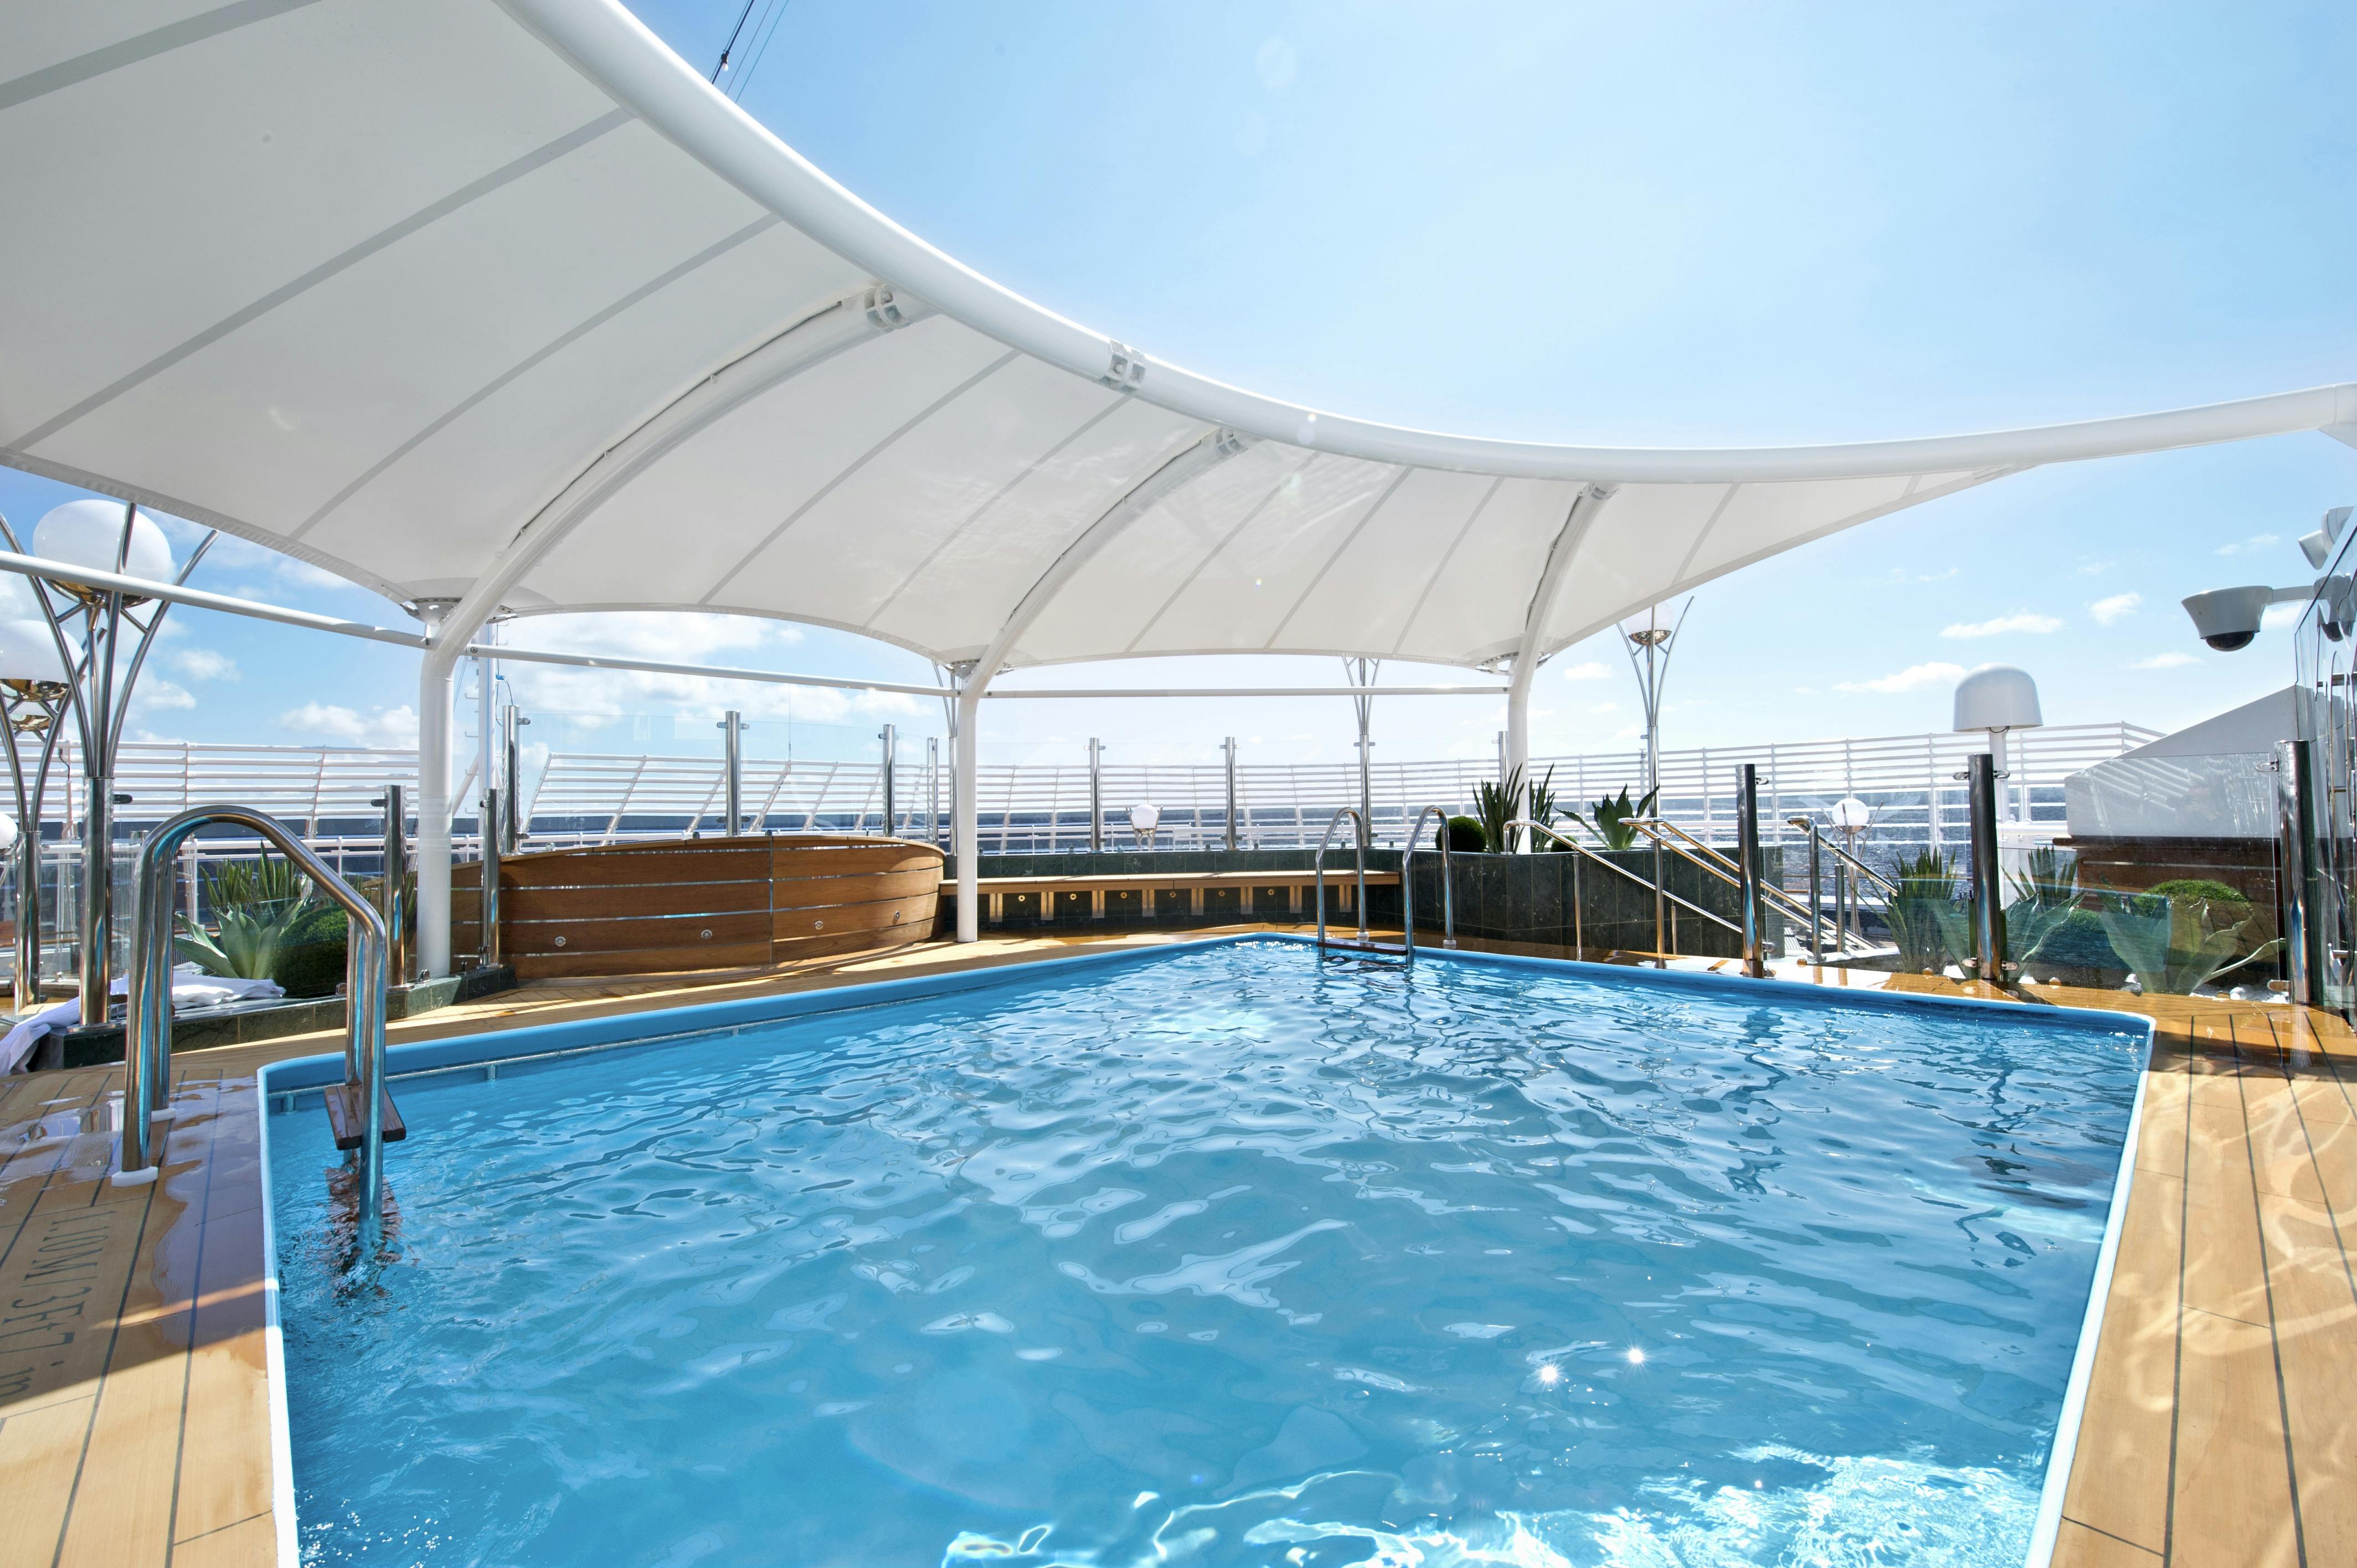 MSC Divina; Fantasia Class; Ship; MSC Yacht Club; The One Pool; Outdoor photography; Pool;